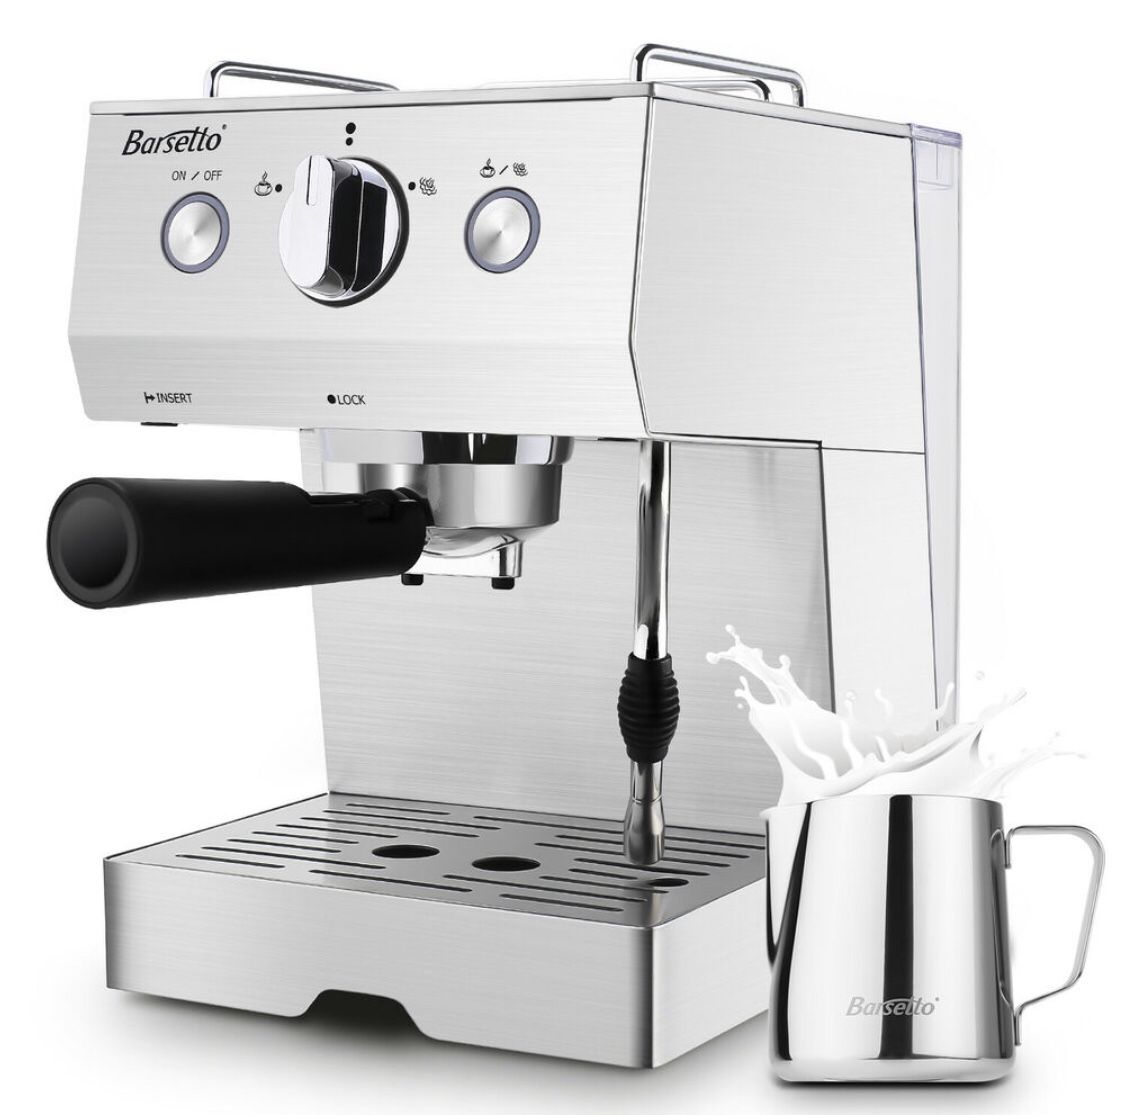 Barsetto Espresso Machine With Milk Frother,Espresso Maker, Coffee Maker with milk steamer,1050W,15 Bar Pump,Stainless Steel